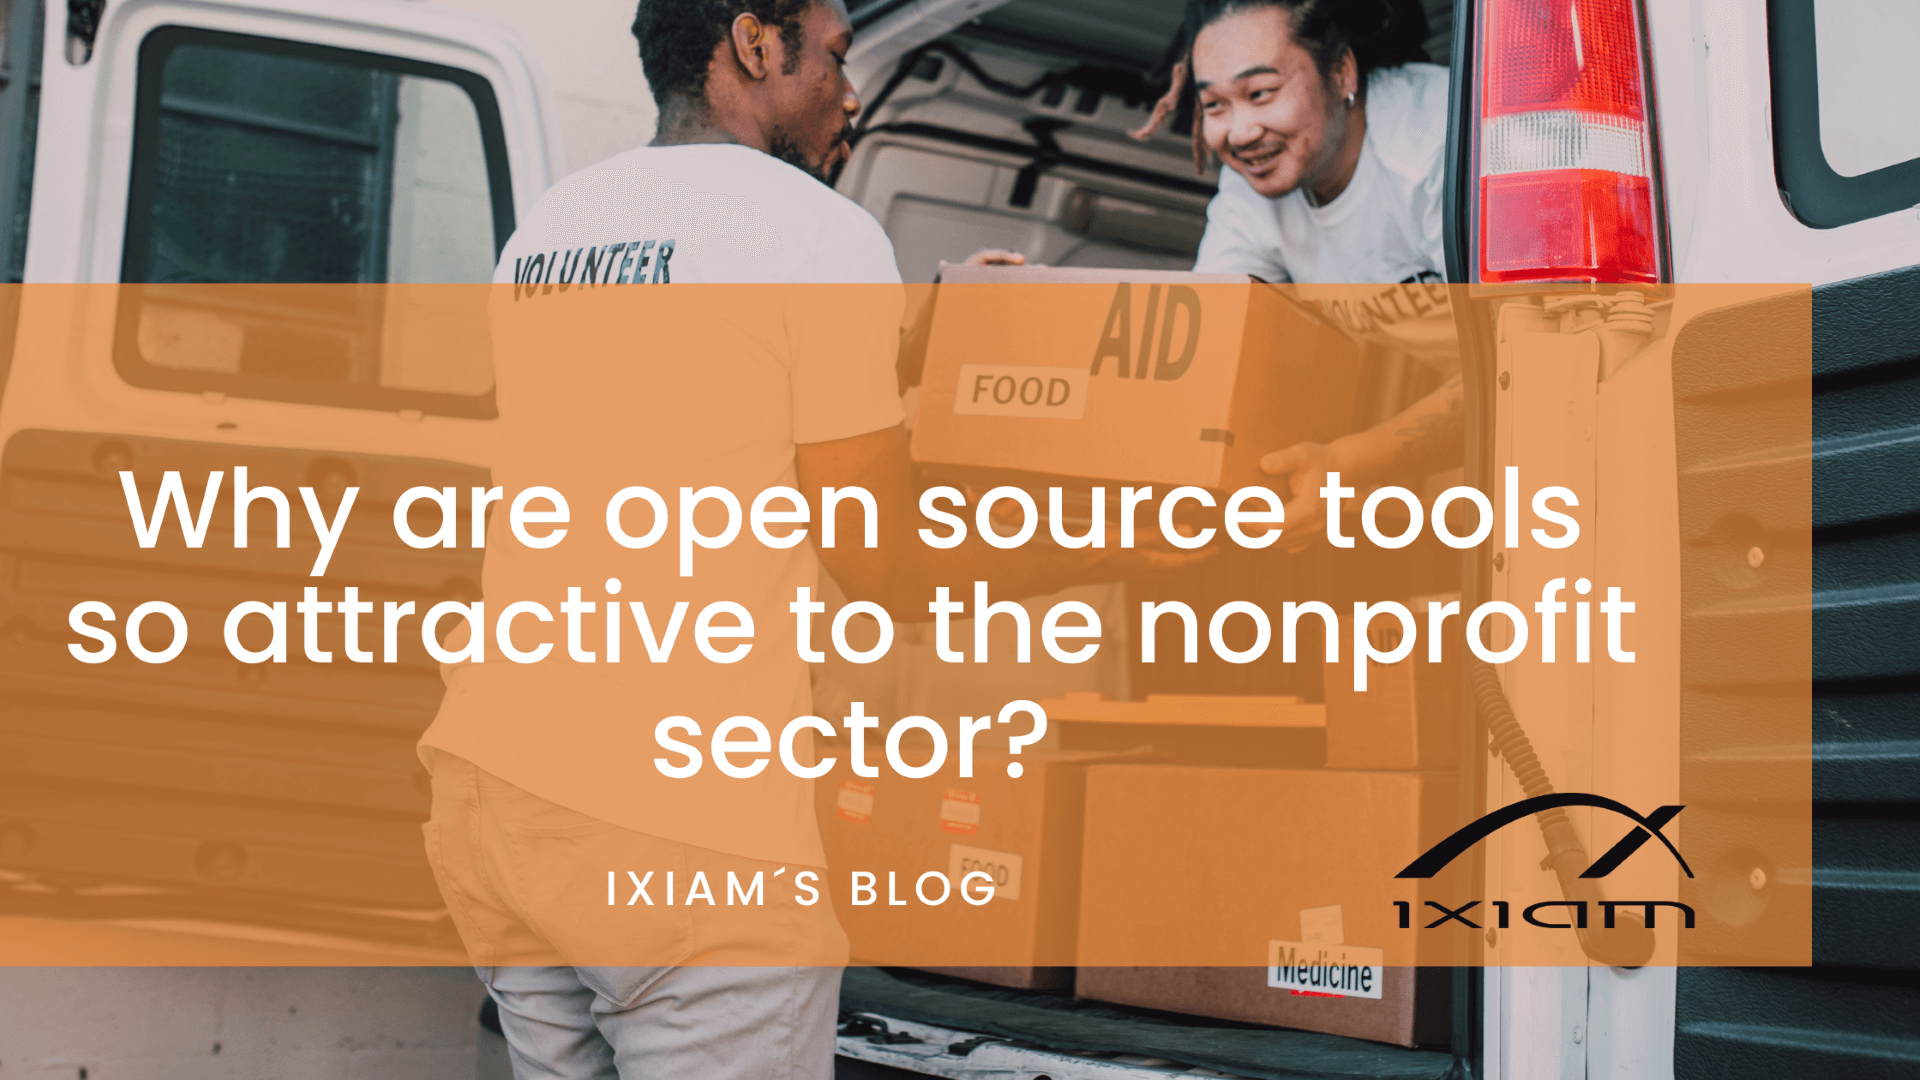 Open source tools provide great benefits to nonprofit organizations. For this reason, iXiam Global Solutions champions this technology.